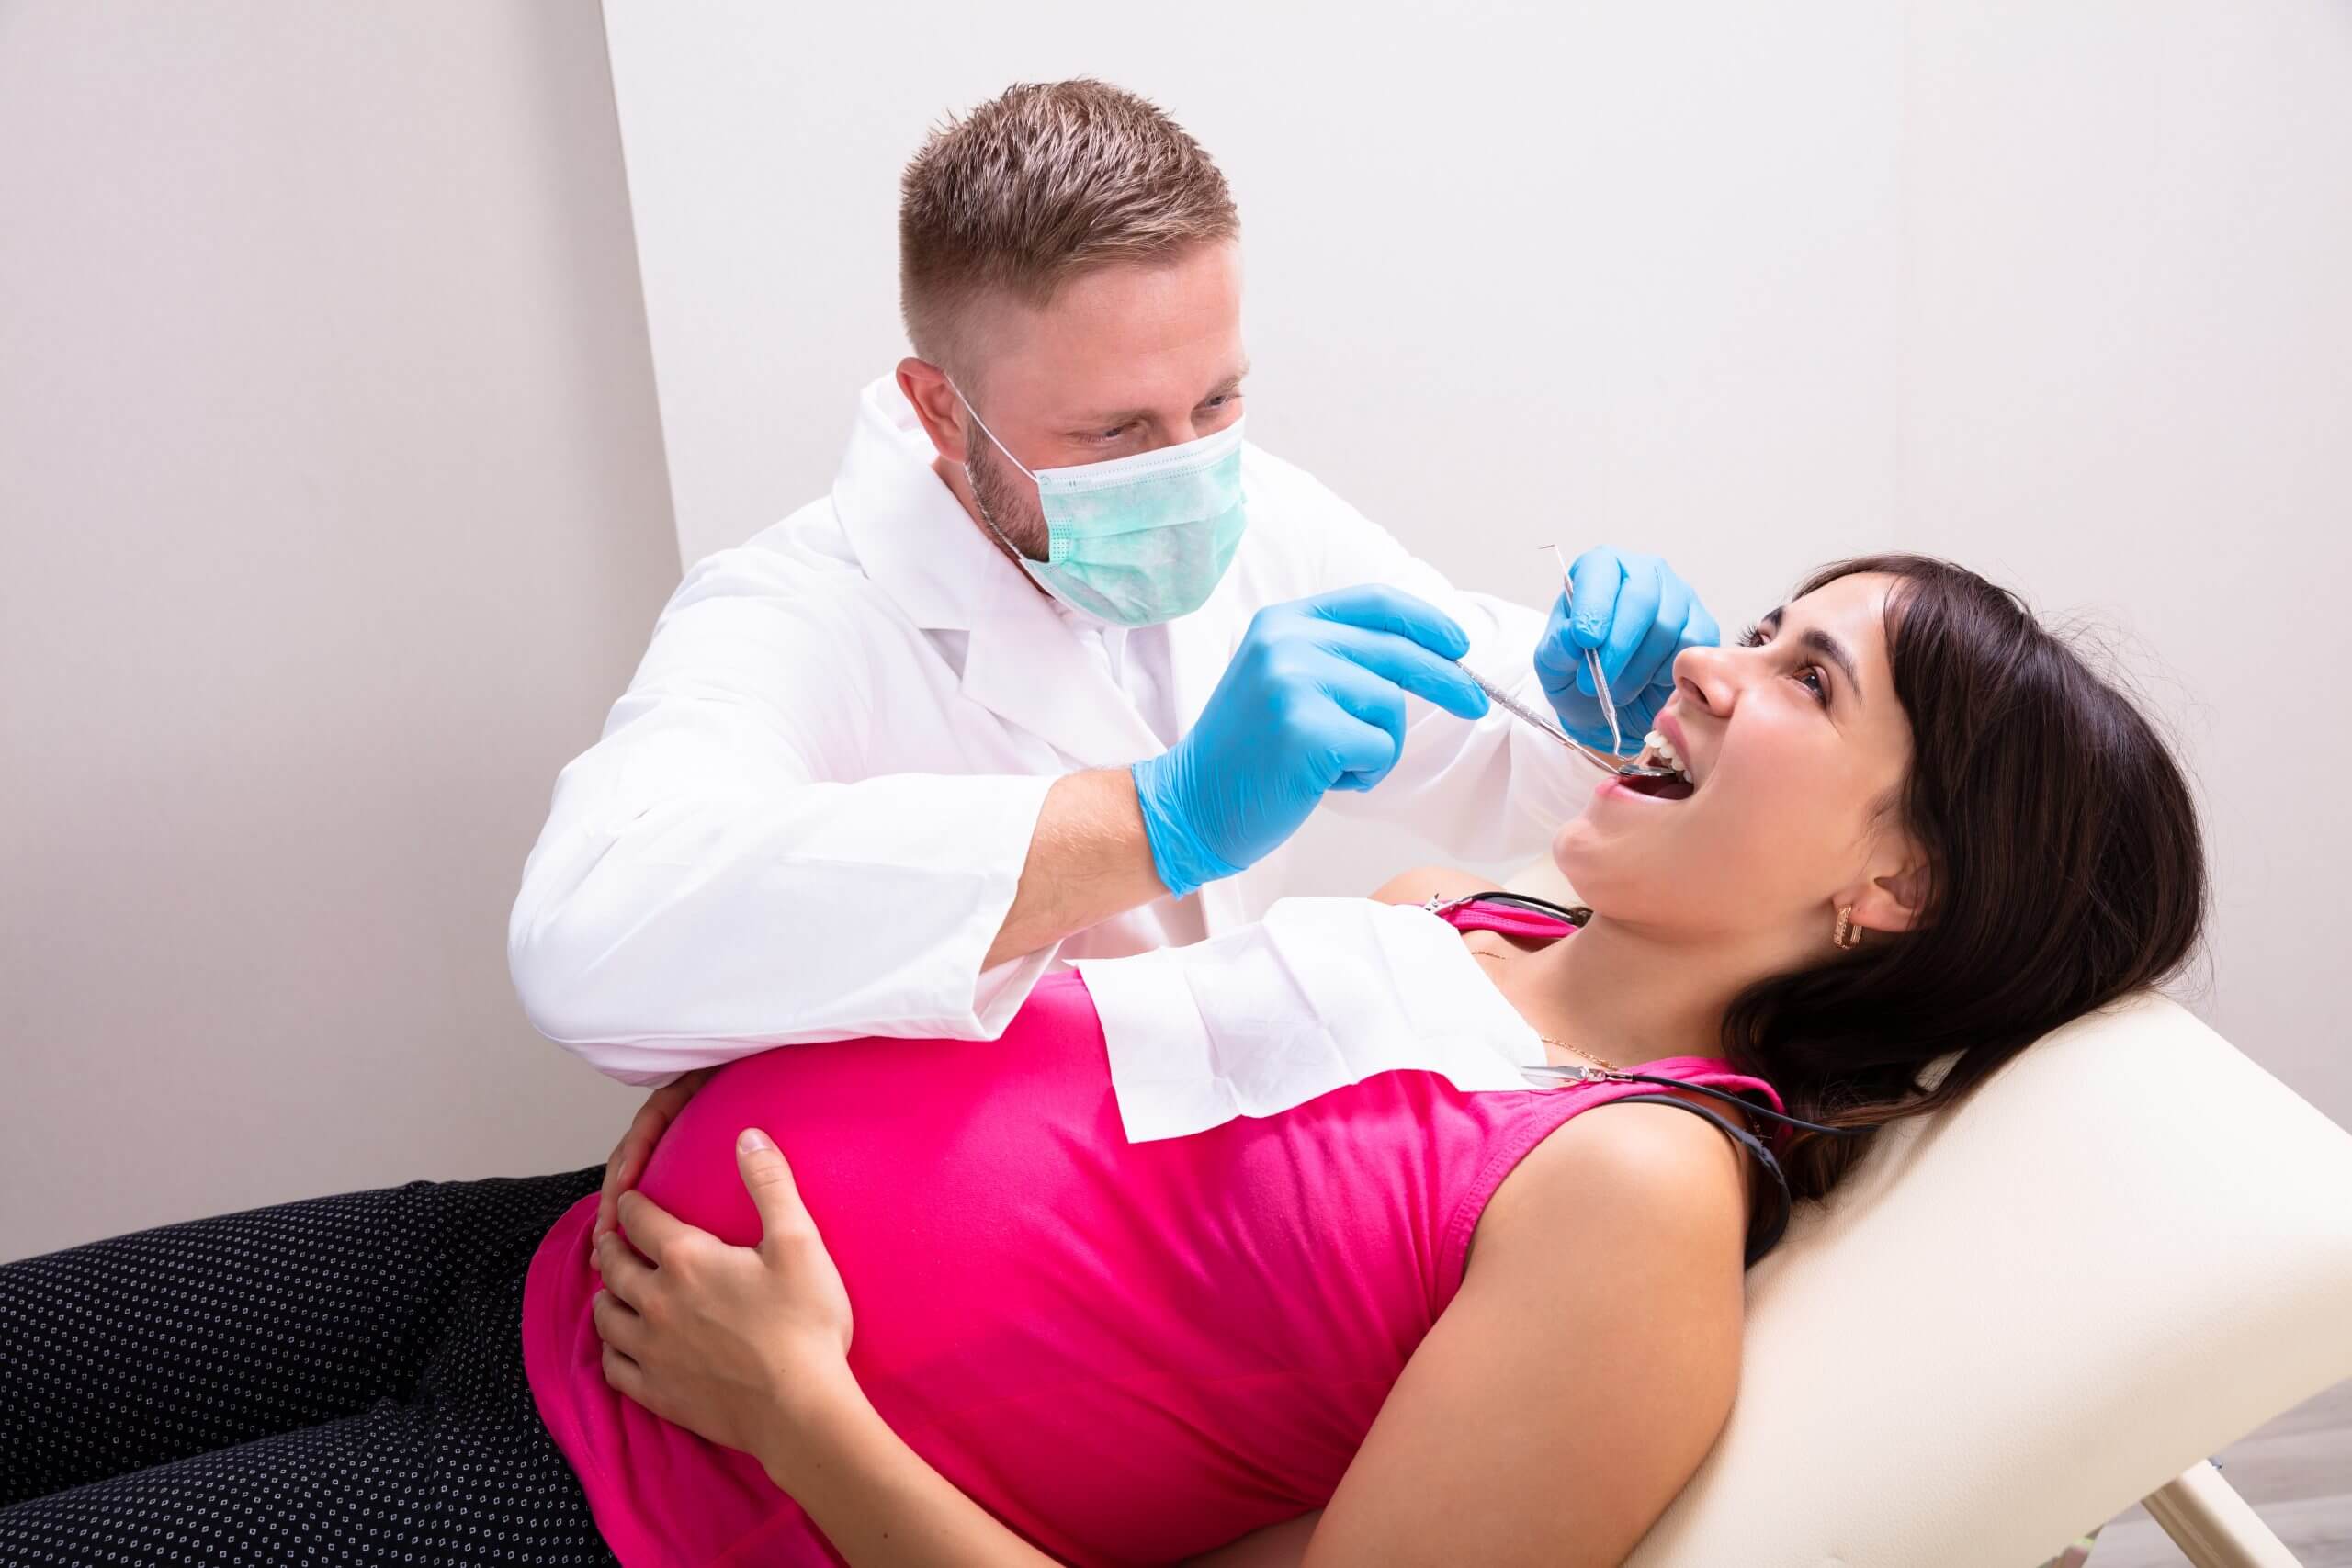 Pregnant Woman getting her teeth examined by a dentist or hygienist